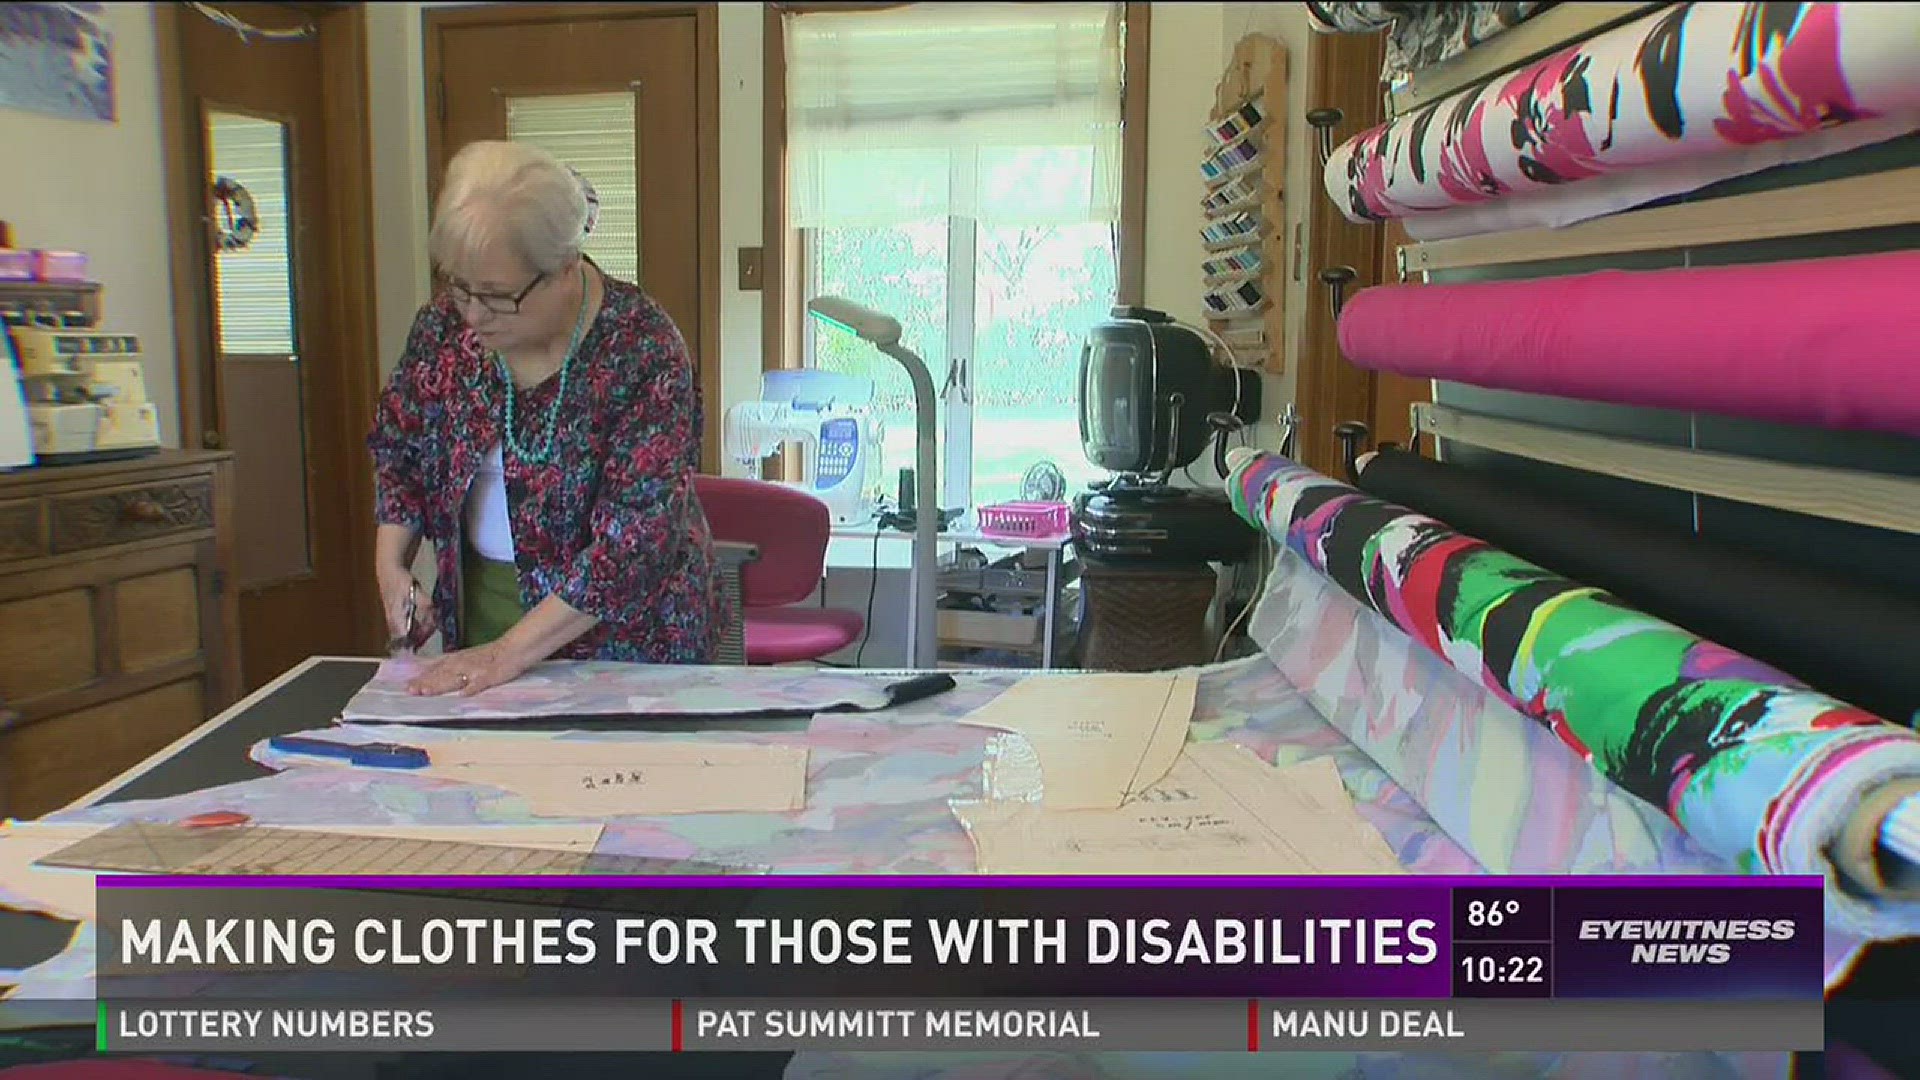 Making clothes for those with disabilities